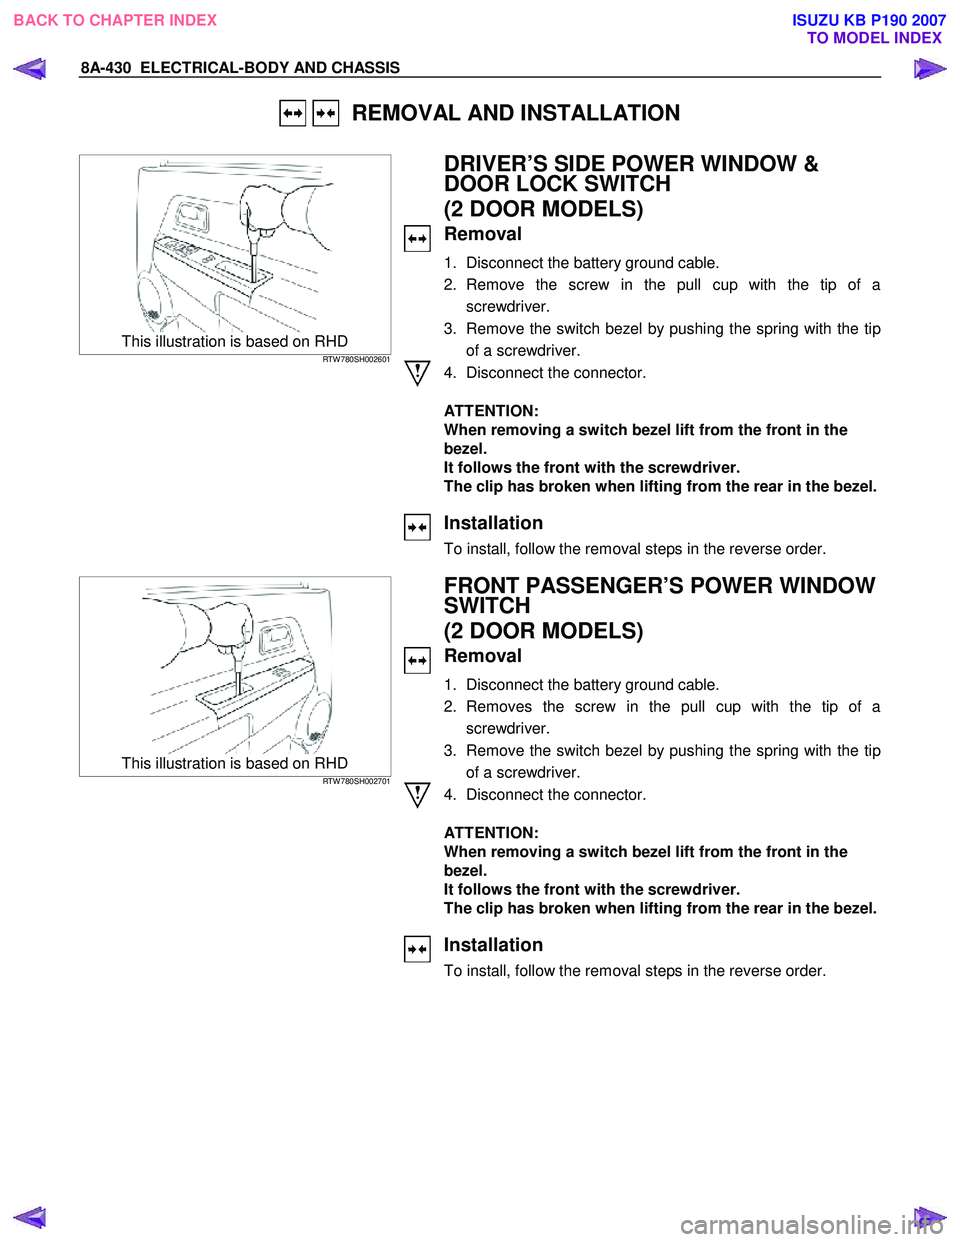 ISUZU KB P190 2007  Workshop Service Manual 8A-430  ELECTRICAL-BODY AND CHASSIS 
   REMOVAL AND INSTALLATION 
 
  
 This illustration is based on RHD RTW 780SH002601  
  
 
 
  
  
 
DRIVER’S SIDE POWER WINDOW &  
DOOR LOCK SWITCH  
(2 DOOR M